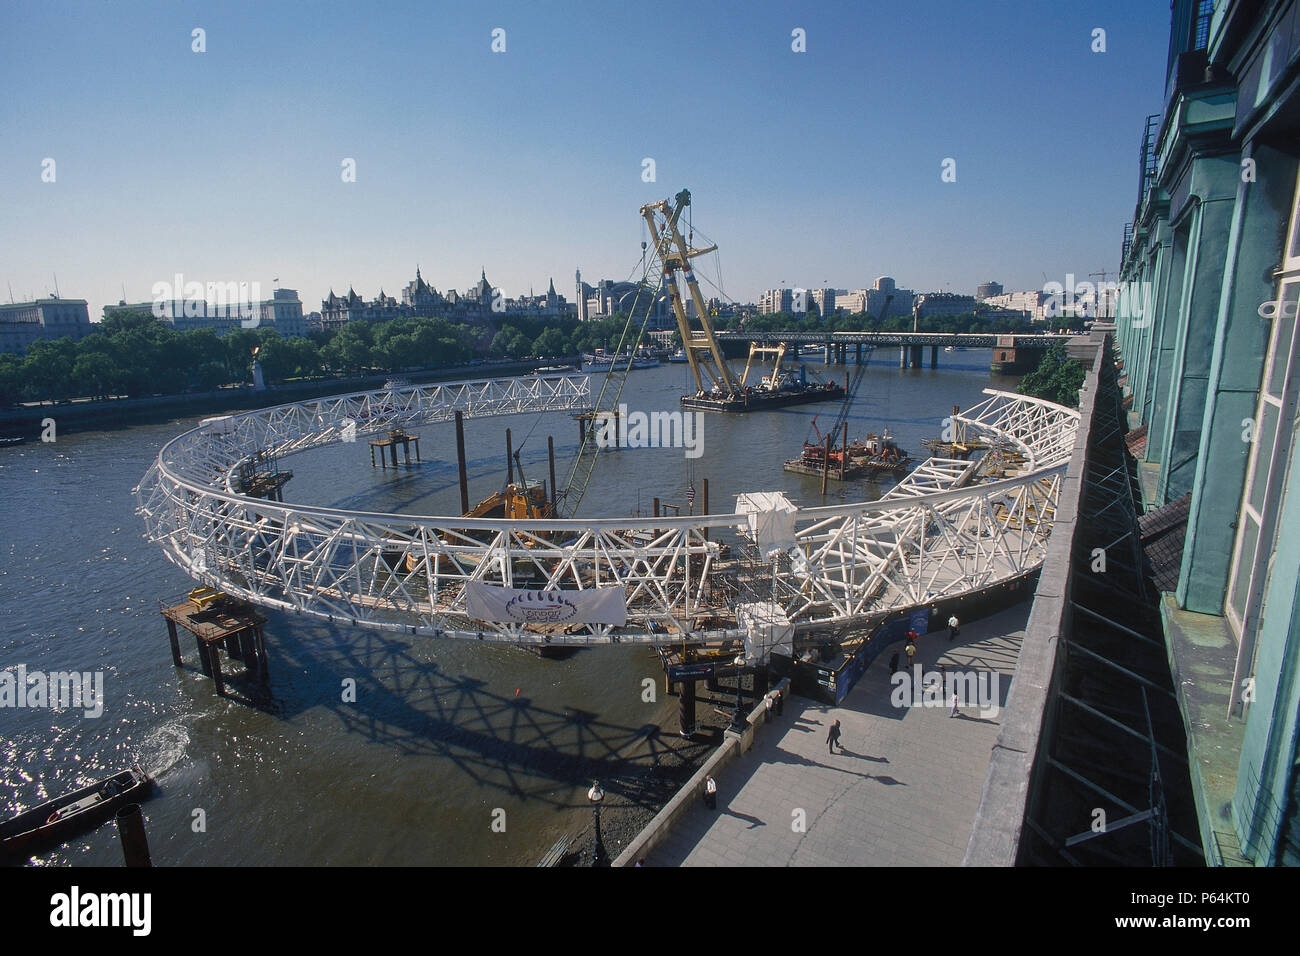 Assembly of main ring steelwork for London Eye, Millennium Wheel. May 1999. London. United Kingdom. Designed by David Marks and Julia Barfield. Stock Photo